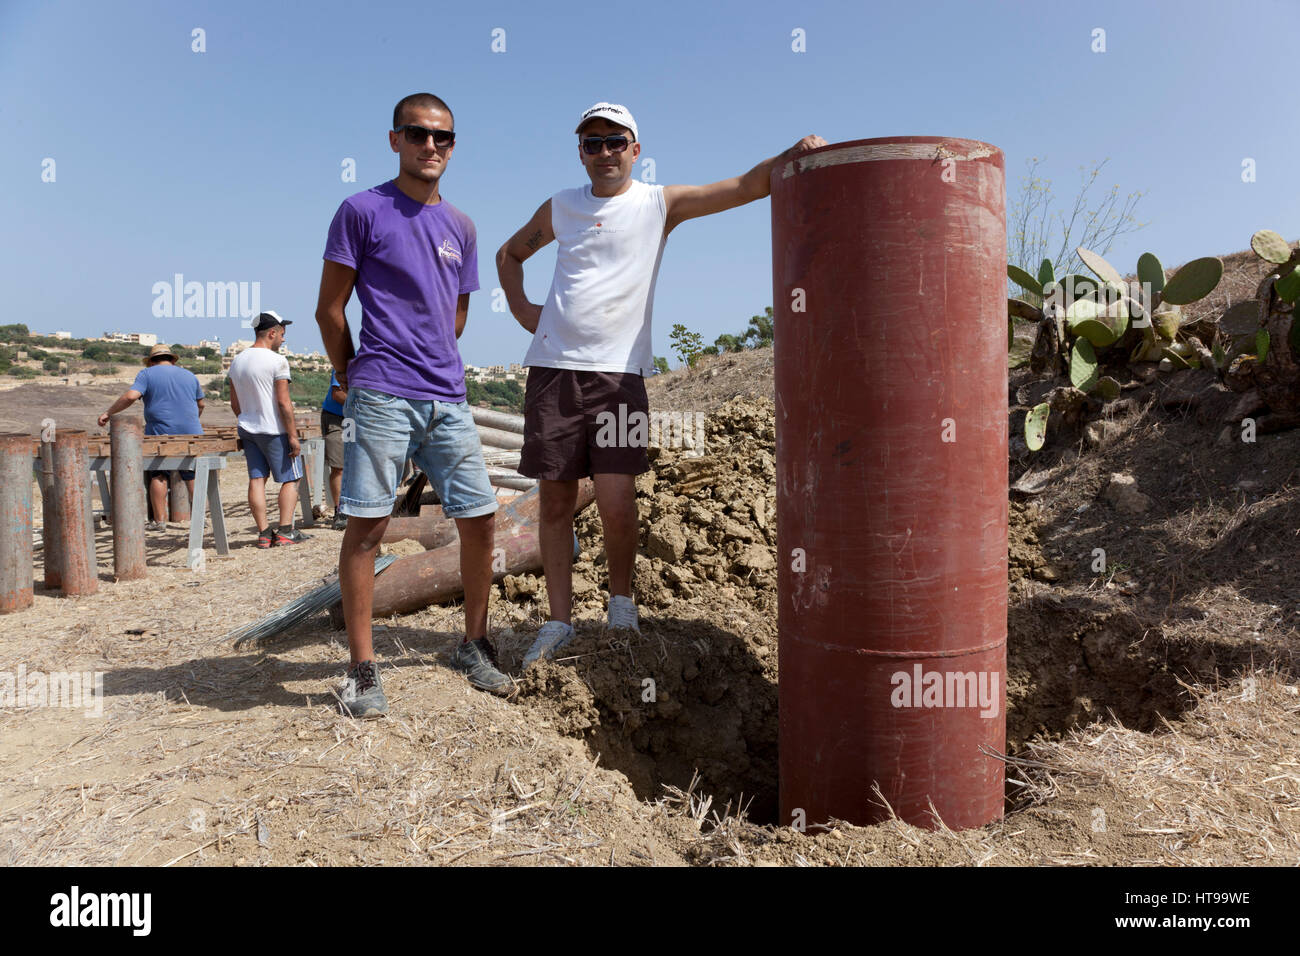 Two Maltese pyrotechnicians pose with the largest launch tube at the launch site of a professional fireworks show set up for a town feasts in Malta. Stock Photo